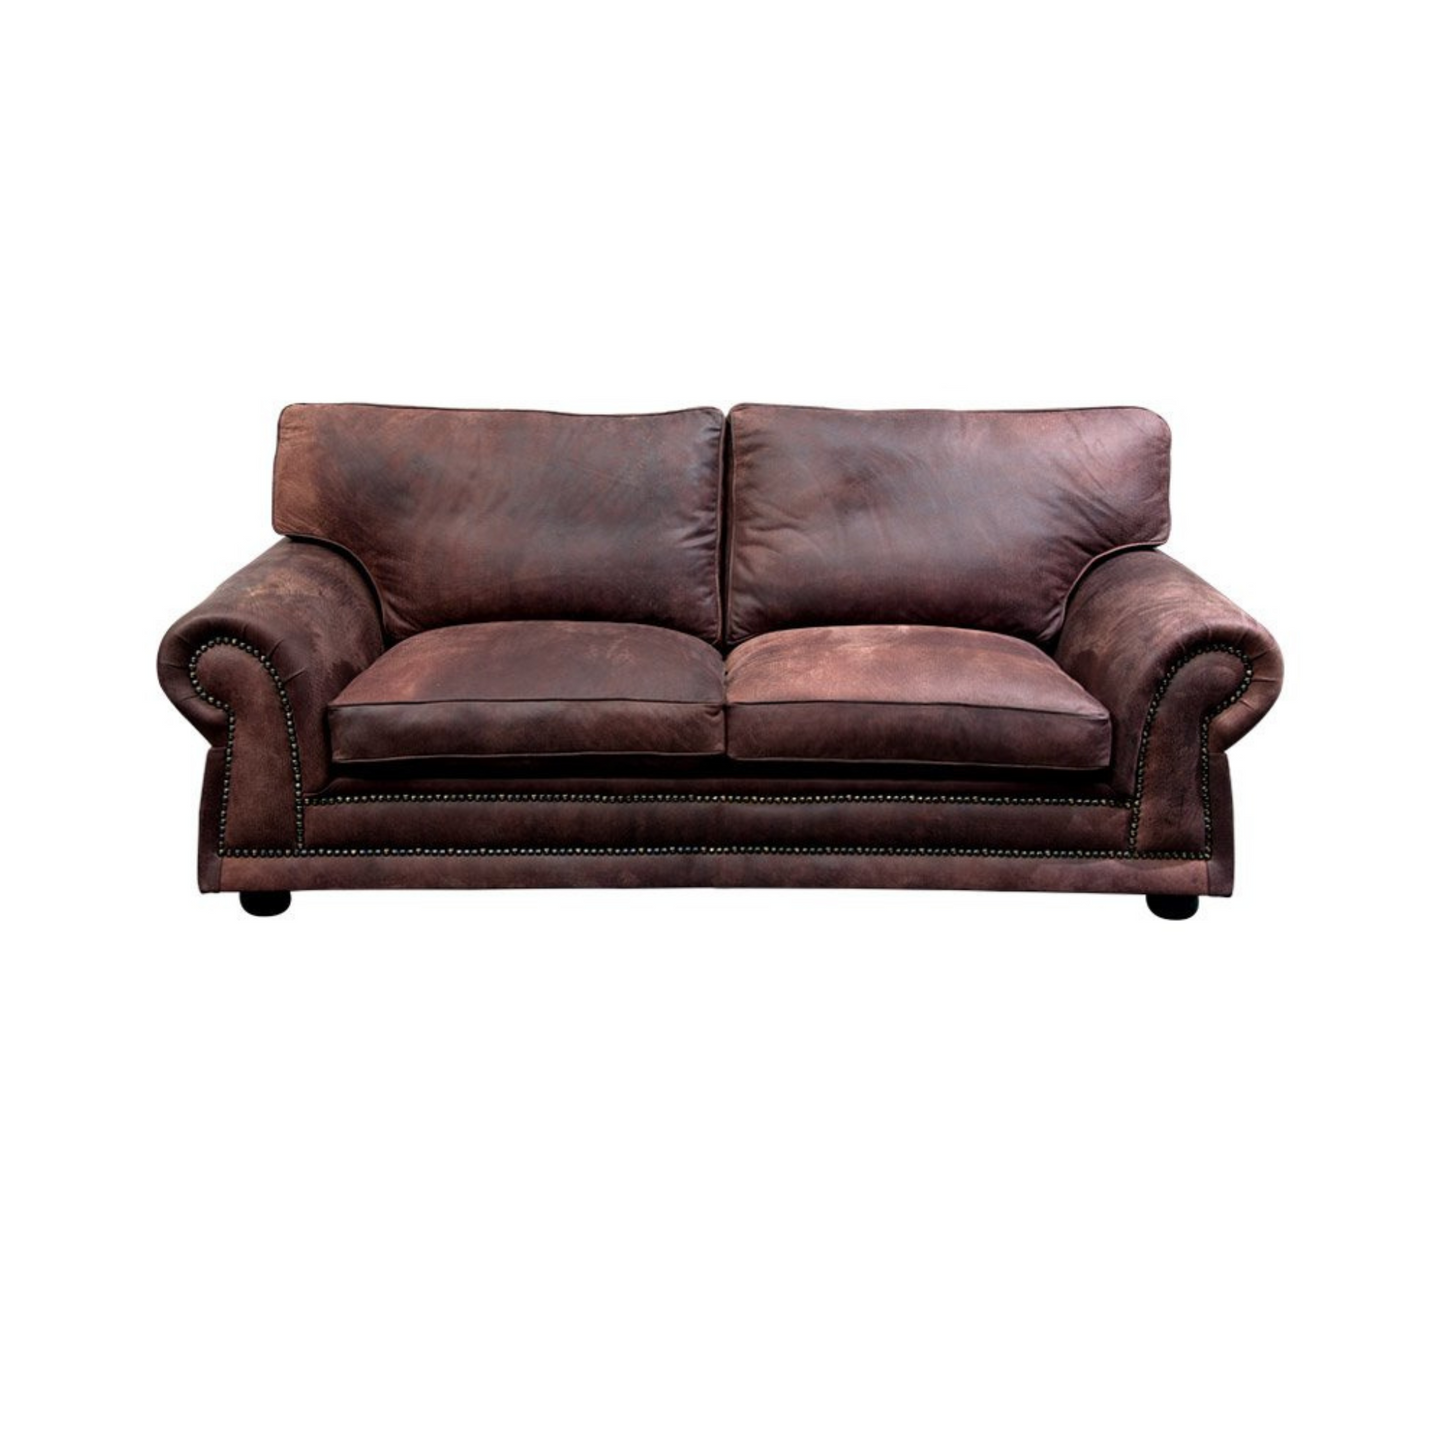 Kulala Sofa – Embrace timeless tradition with the Kulala Sofa, a classic piece available in our premium Kudu, Oryx, and Cow leathers. Immerse your space in the richness of tradition and craftsmanship.  Tailor your experience with custom sizes, ensuring a perfect fit for your unique living space.